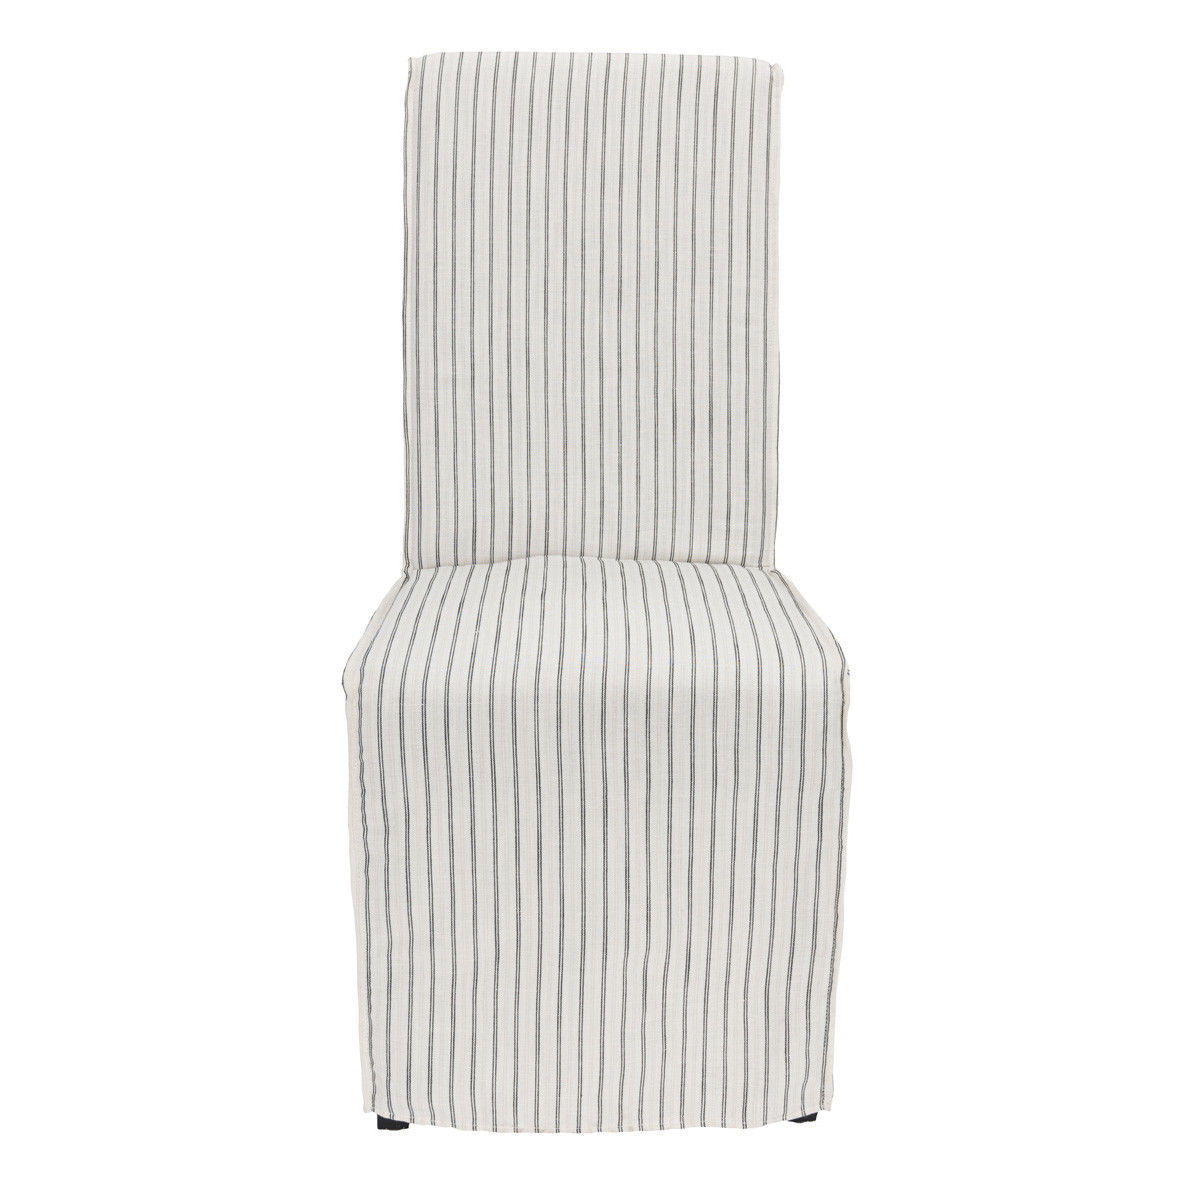 Picture of ARIANNA UPHOLSTERED DINING CHAIR